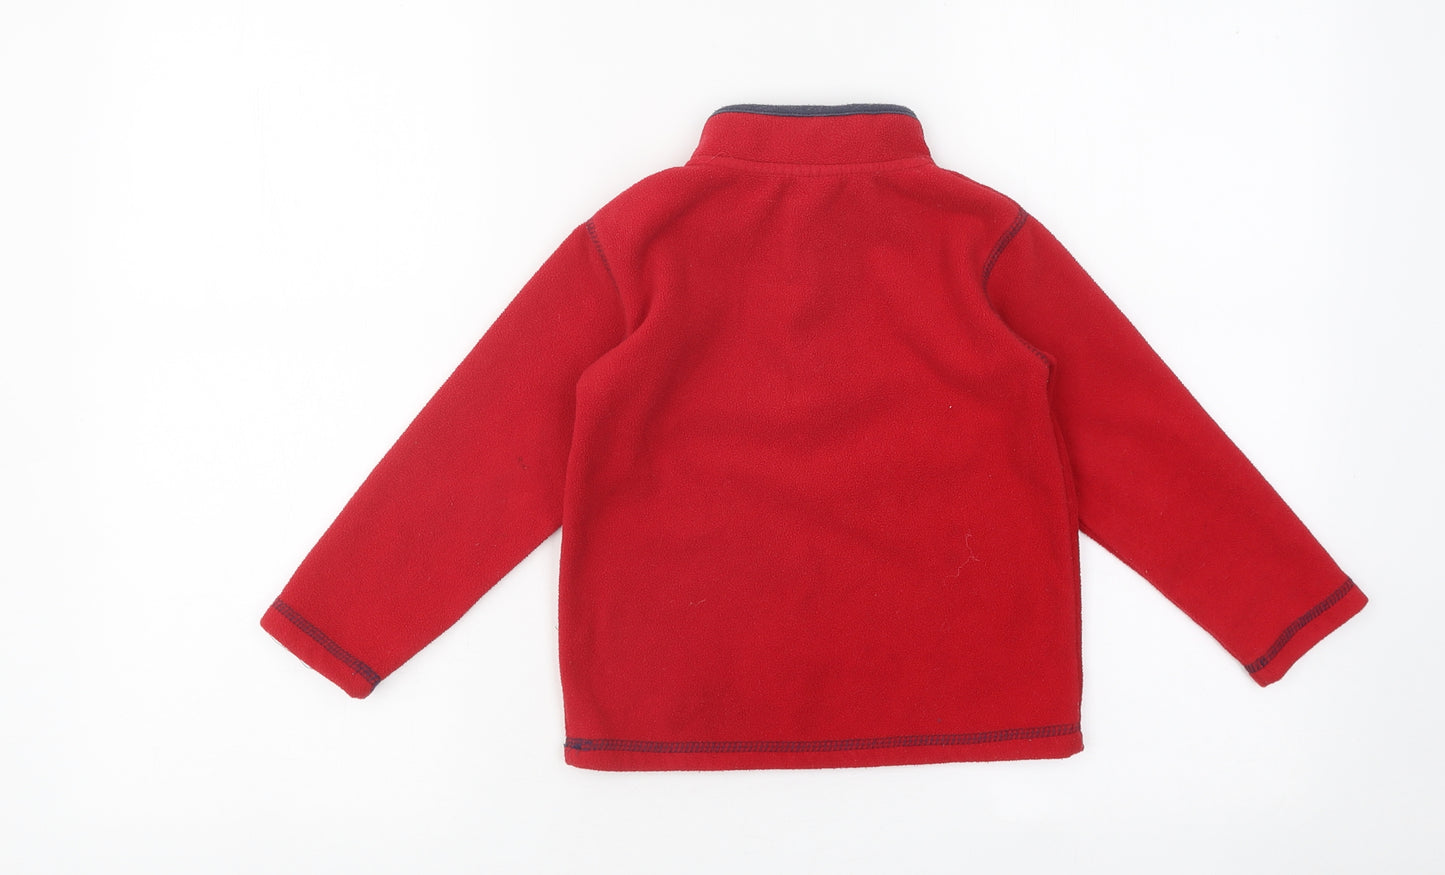 Urban Rascals Boys Red Polyester Pullover Sweatshirt Size 2-3 Years Zip